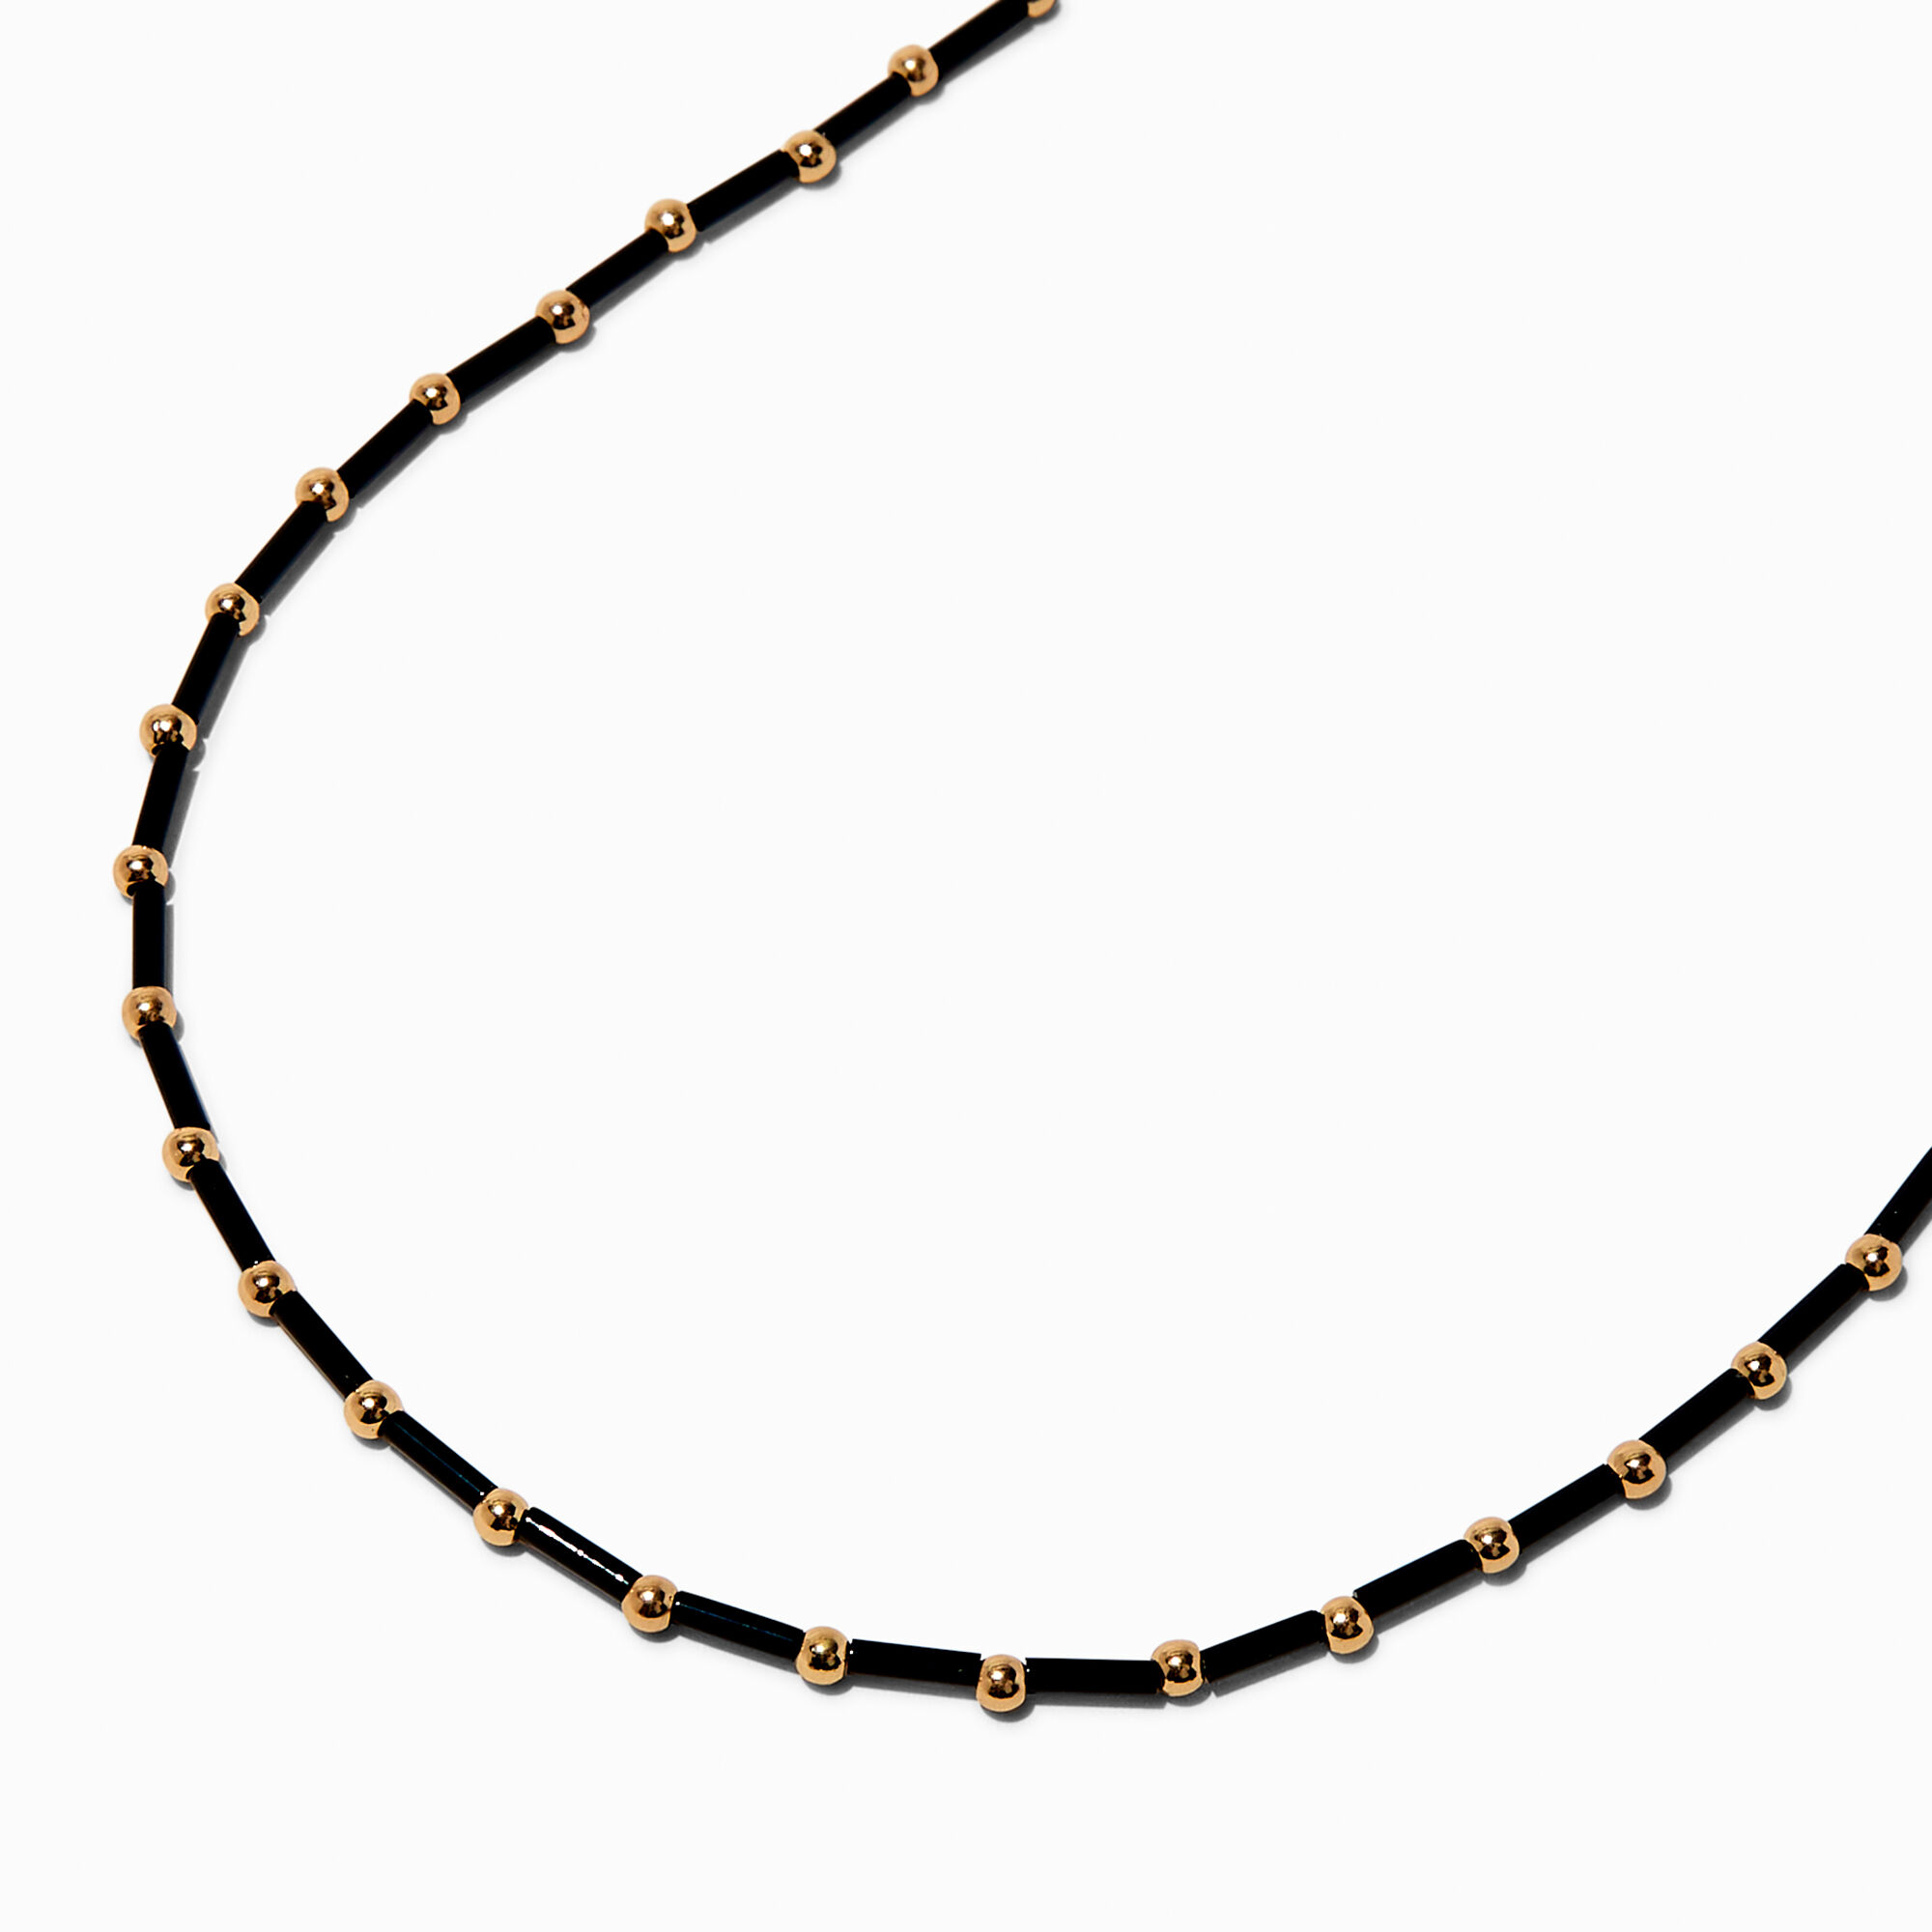 View Claires Bugle Bead GoldTone Necklace Black information